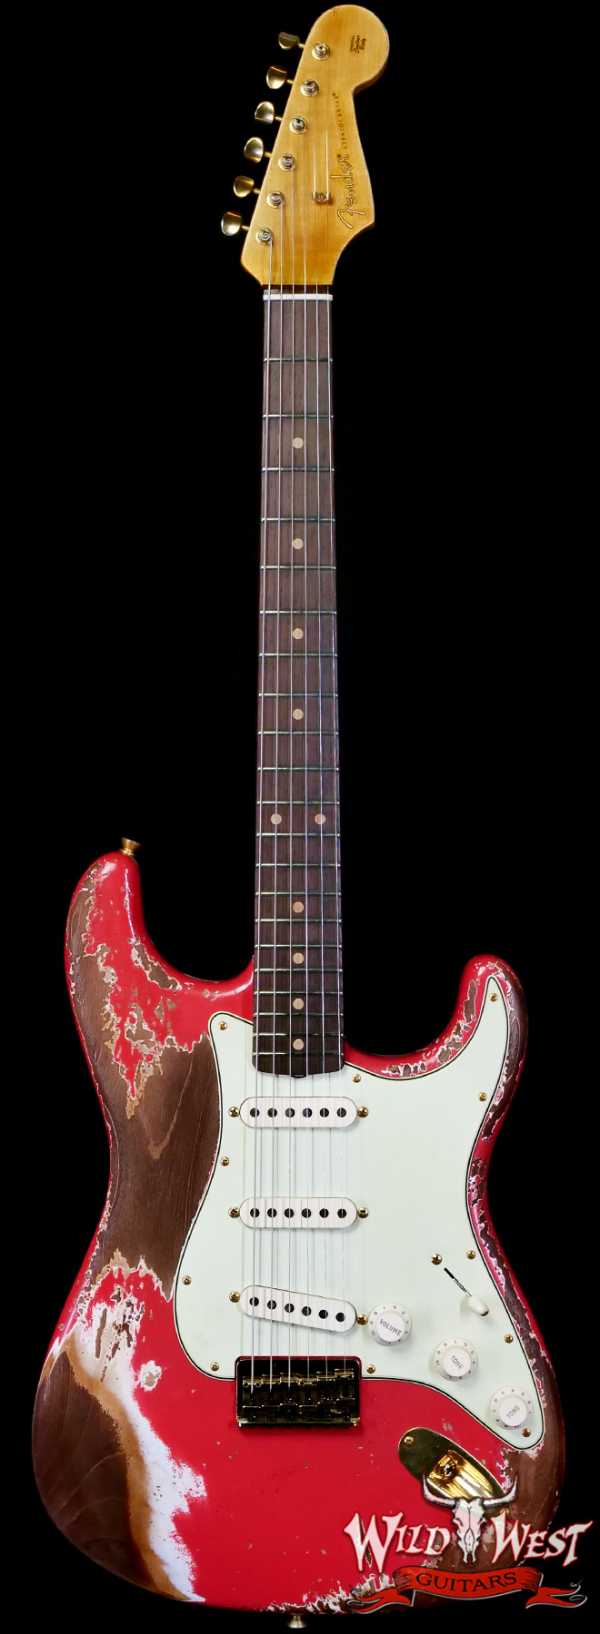 Fender Custom Shop Wild West Guitars 25th Anniversary 1960 Stratocaster Hardtail Madagascar Rosewood Fretboard Heavy Relic Fiesta Red 7.05 LBS